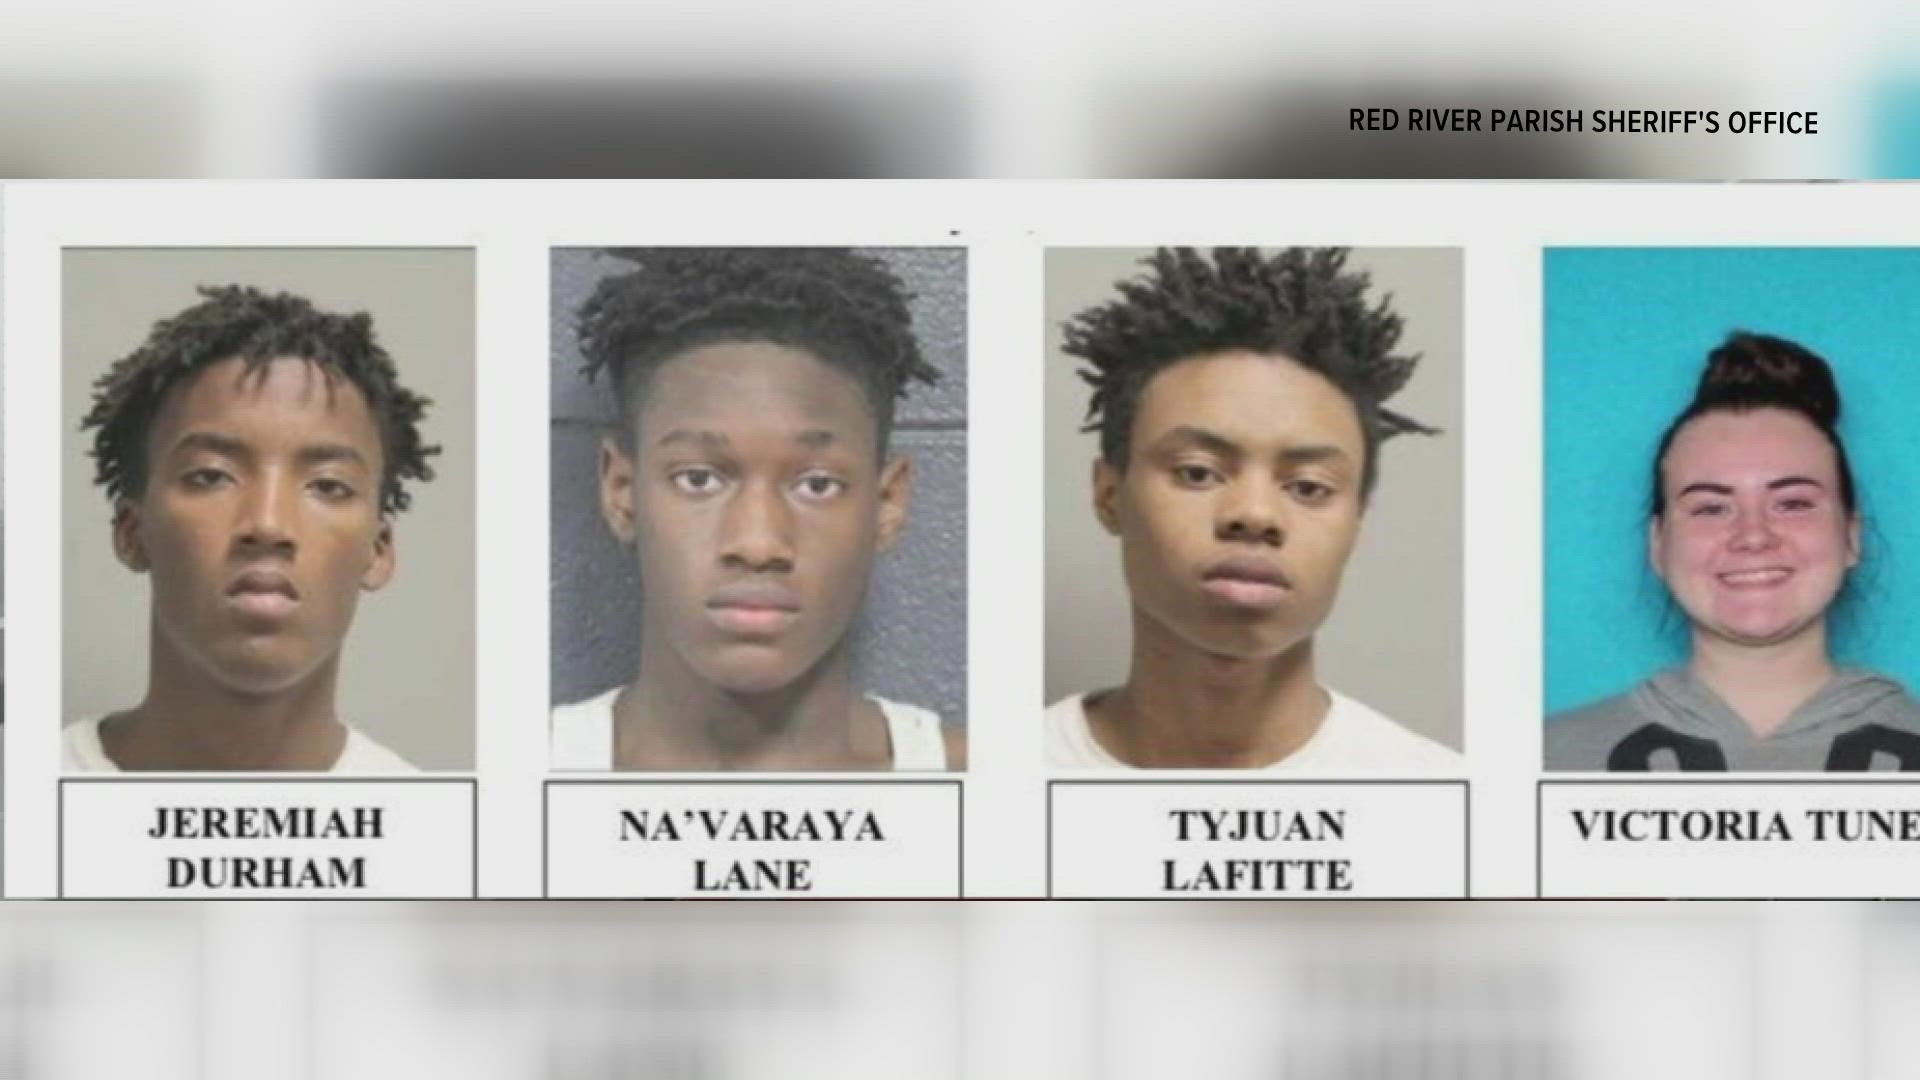 All four were arrested early Sunday morning outside a Houston motel.